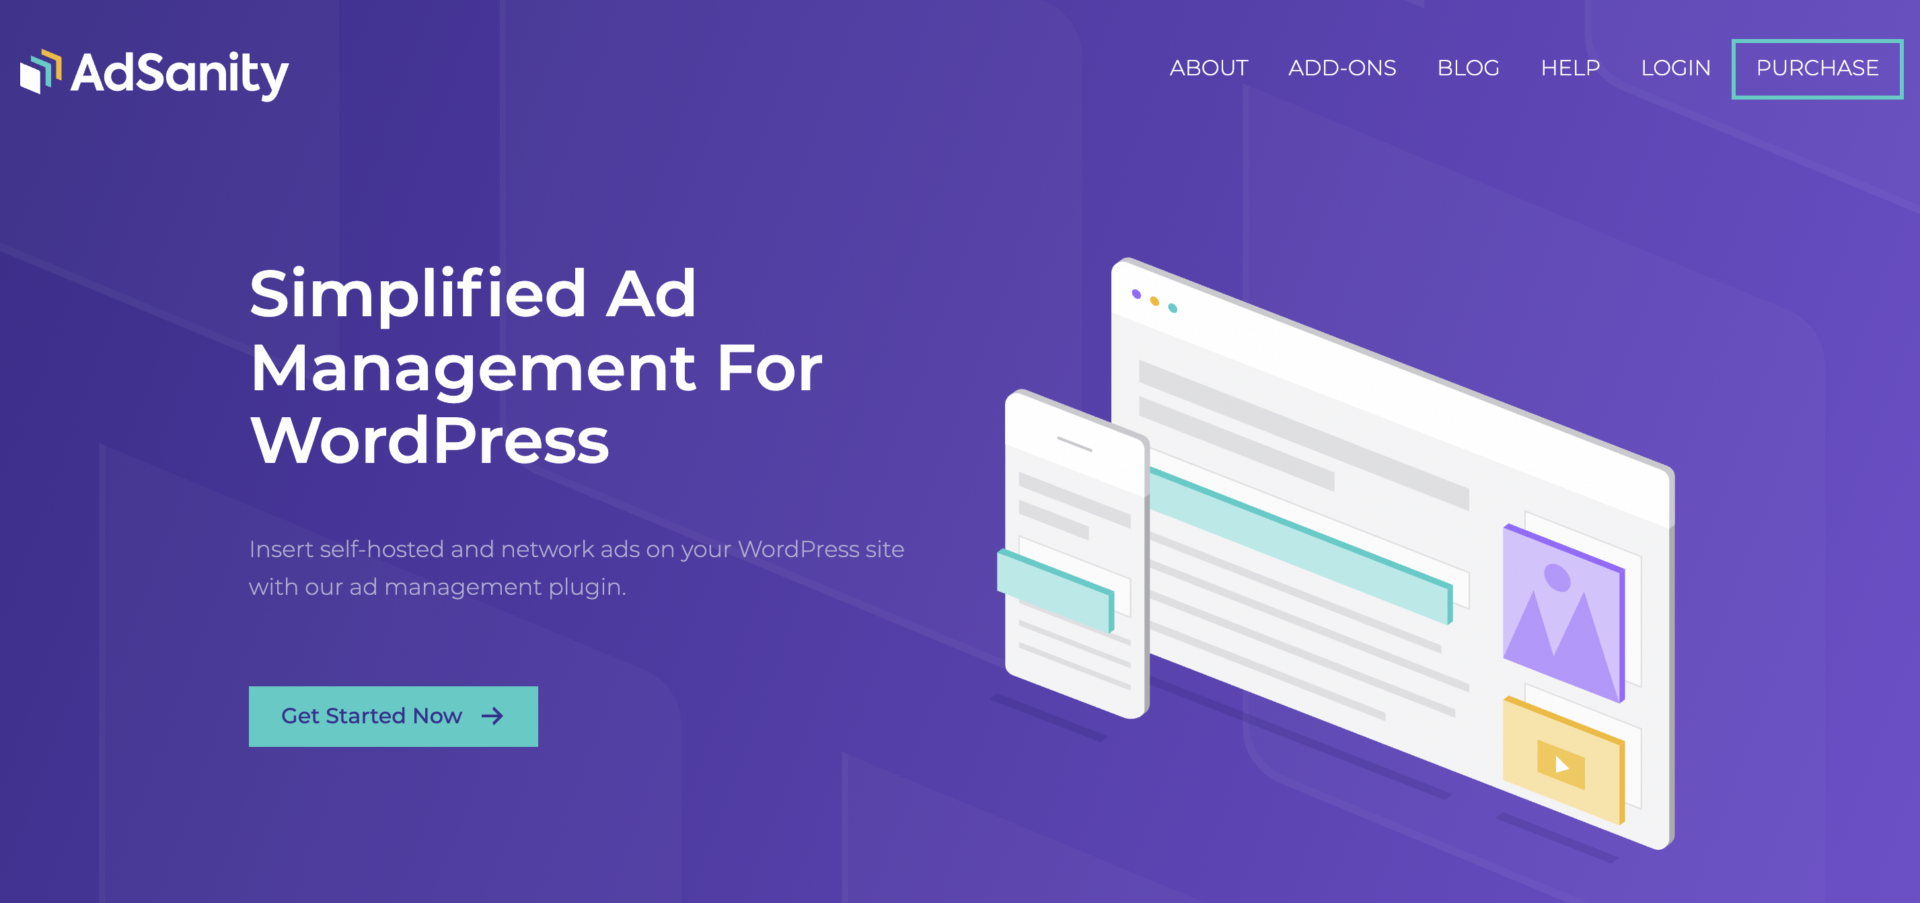 Adsanity - Simplified Ad Management For WordPress